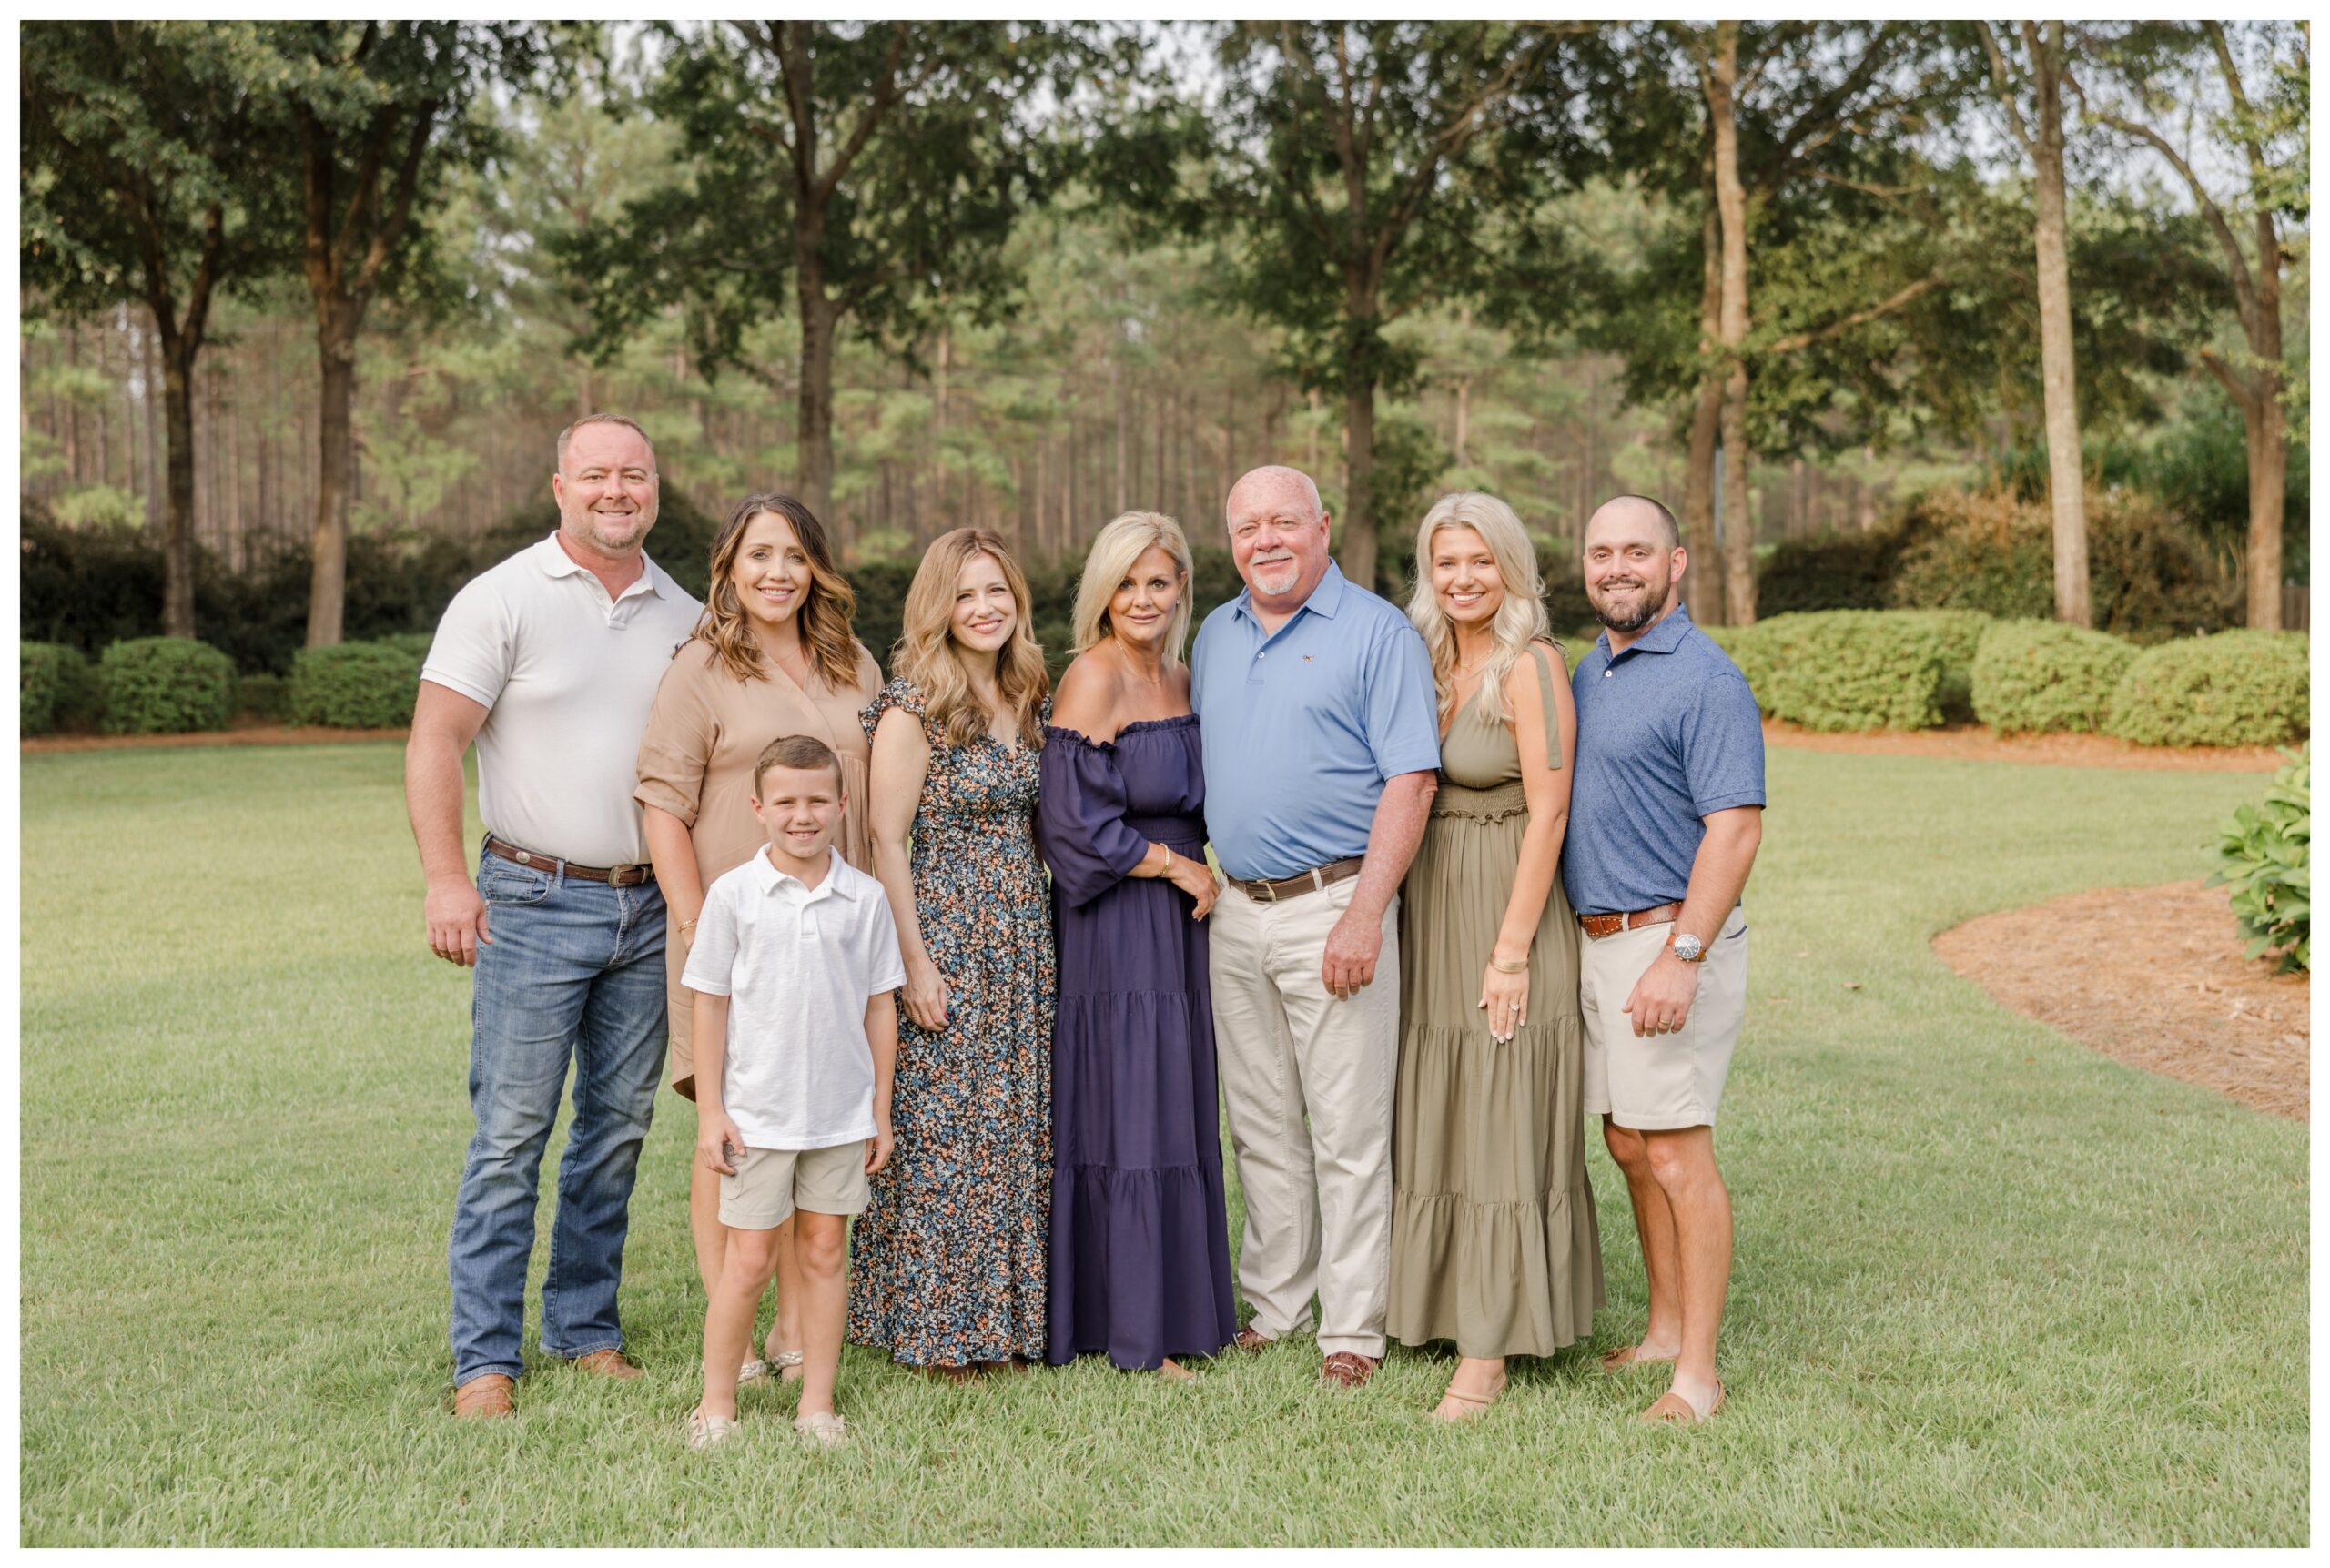 Family portrait of grandparents with their children and grandchild from a Greenville family photography session.